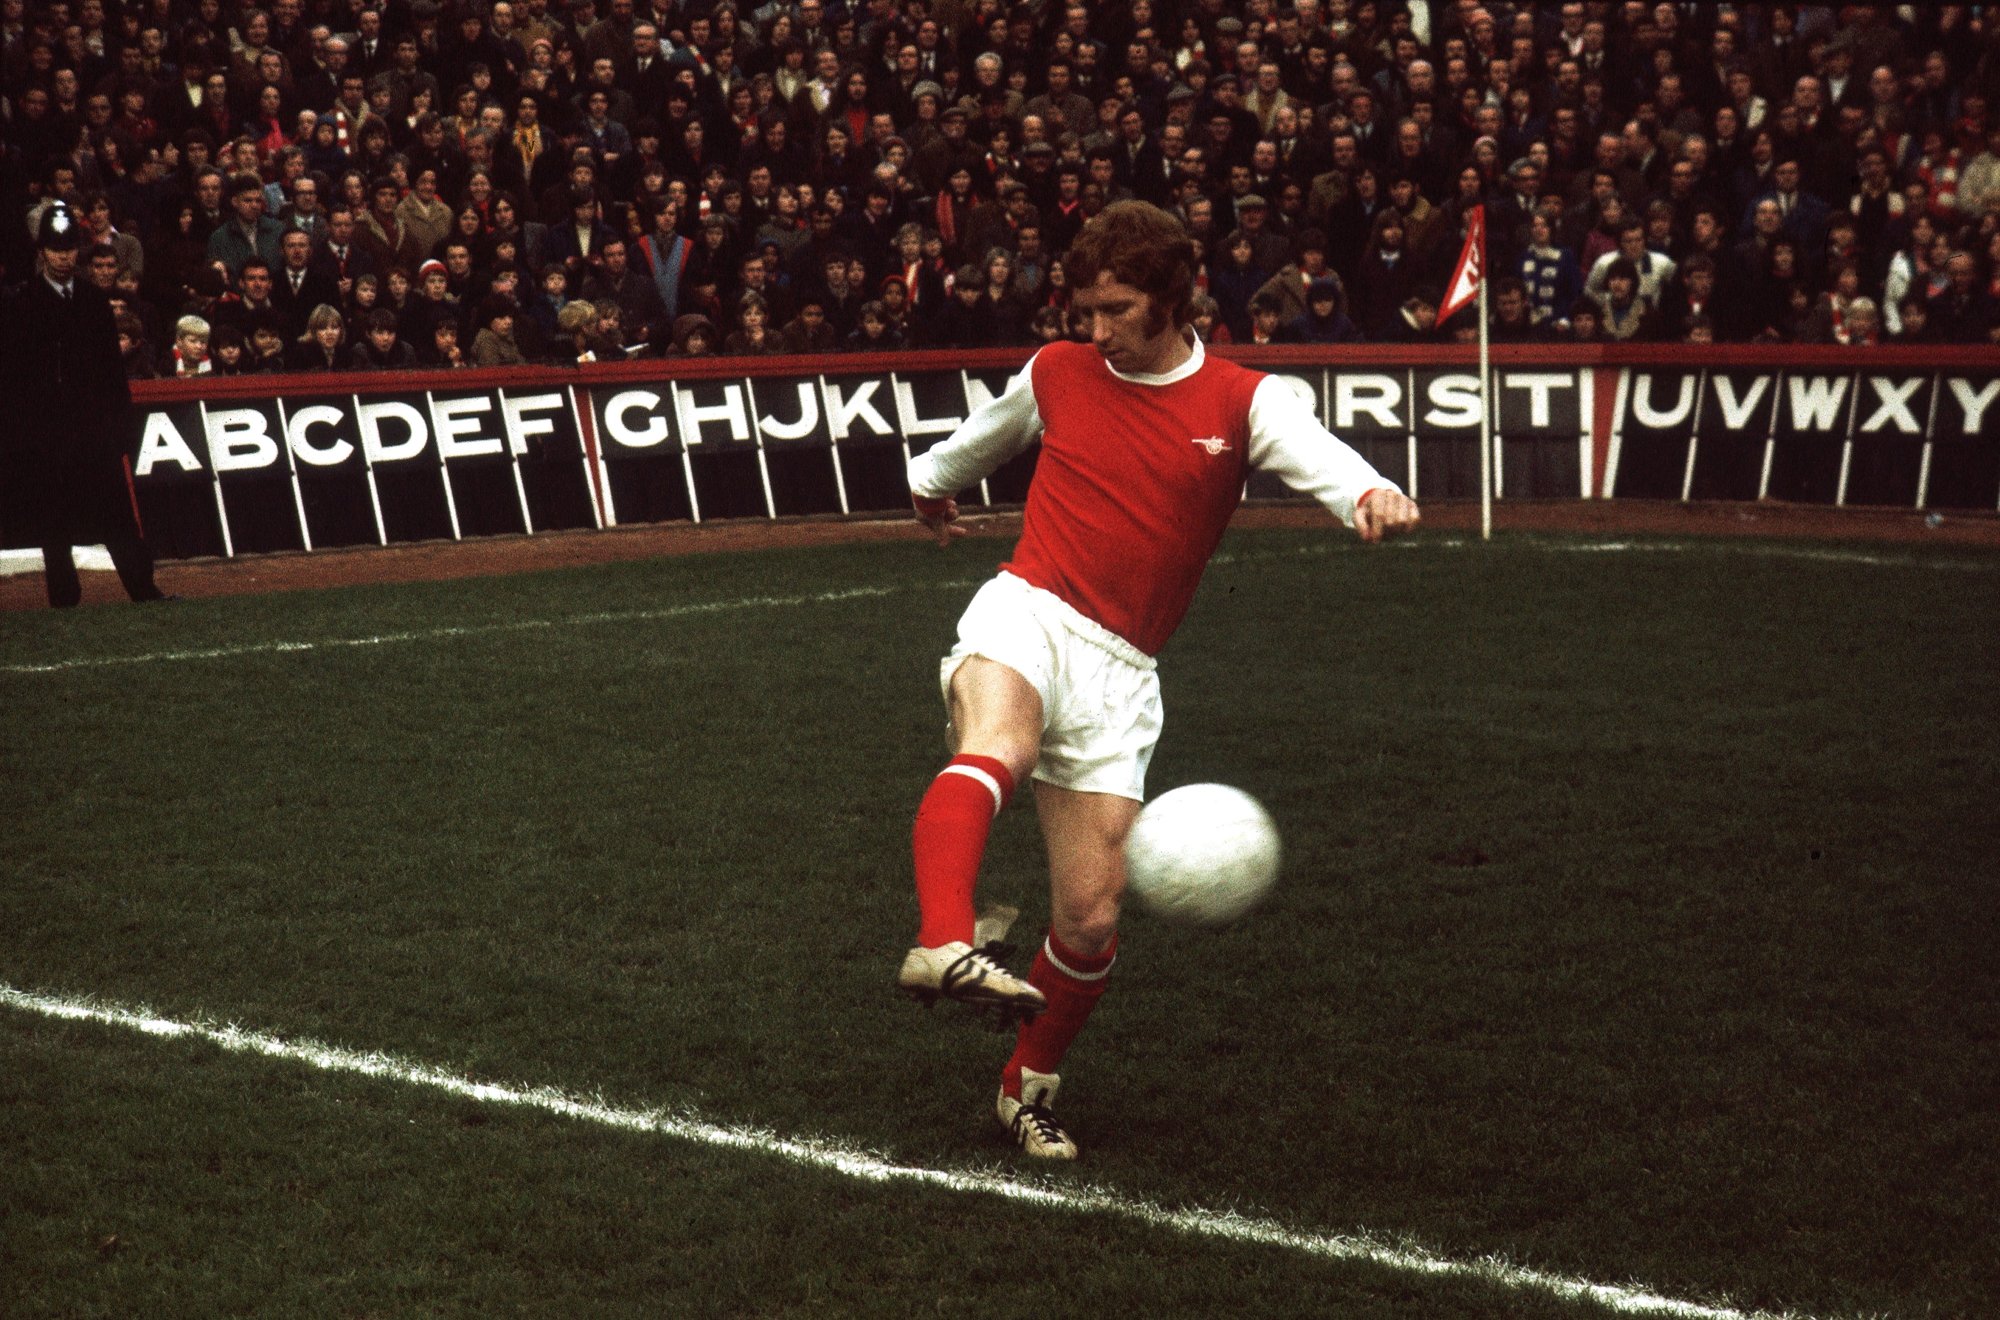  Alan Ball, a former professional footballer who played as a midfielder, is seen here playing for Arsenal against Manchester United.